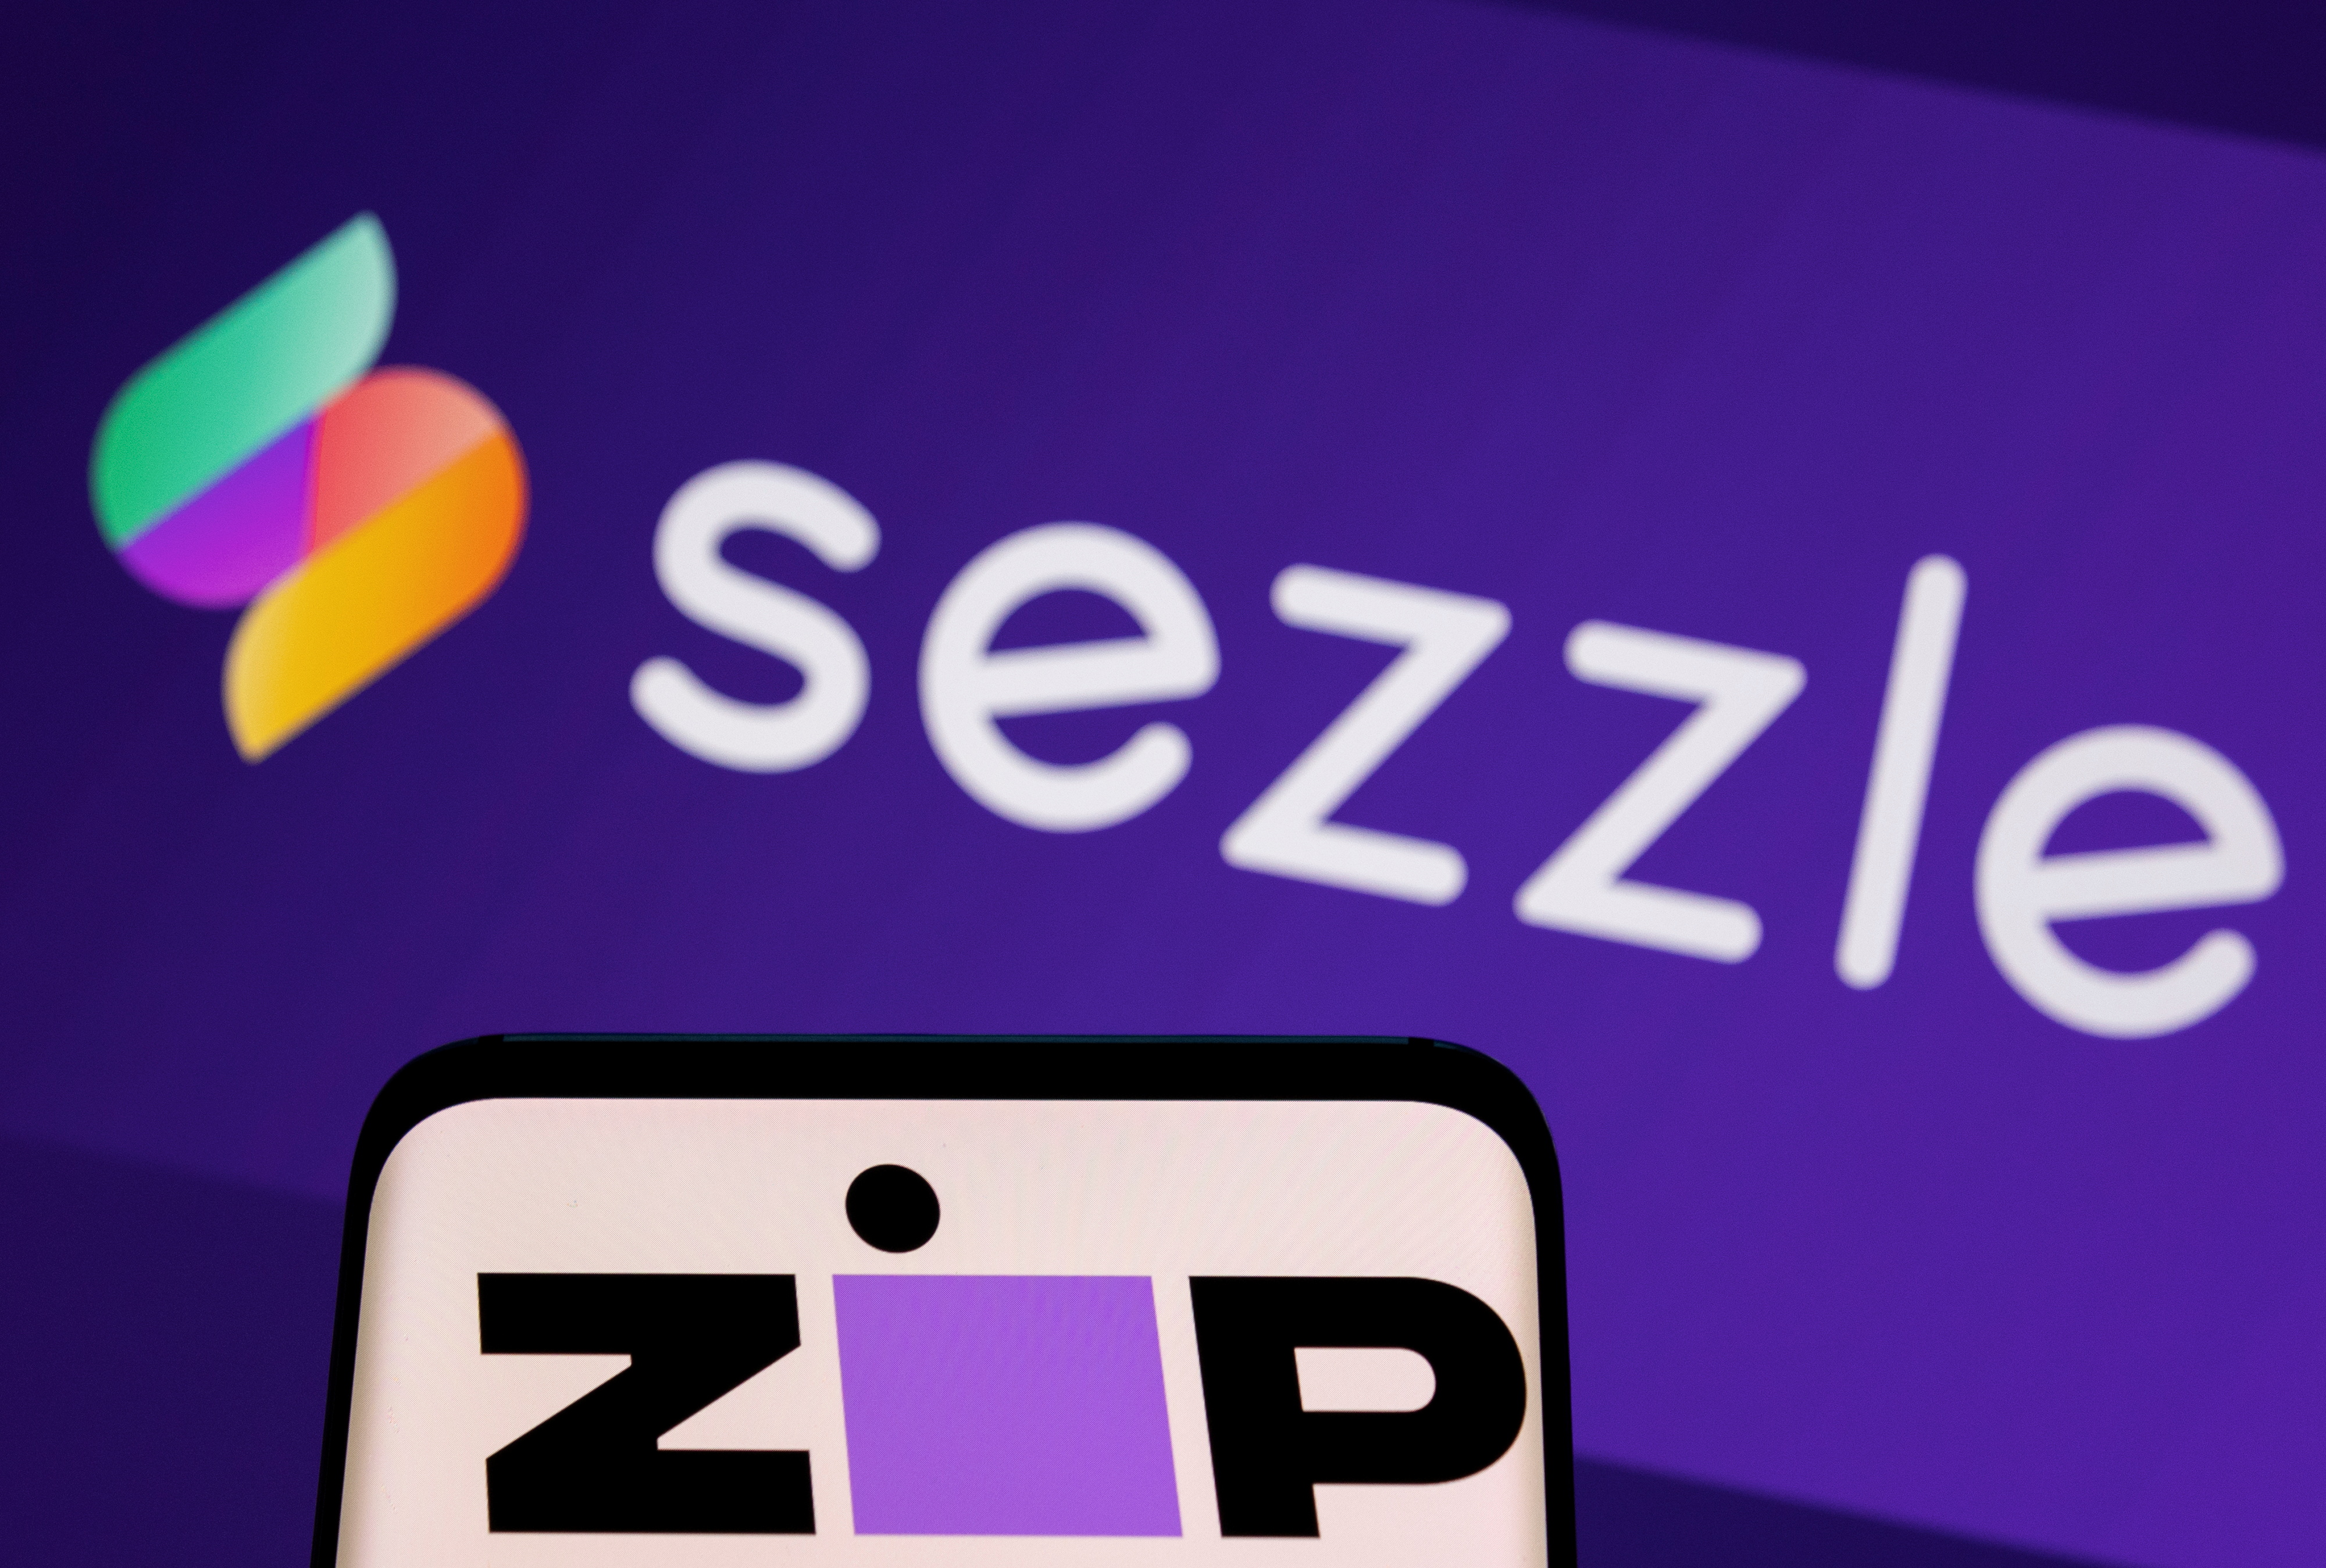 Illustration shows Sezzle and Zip logos